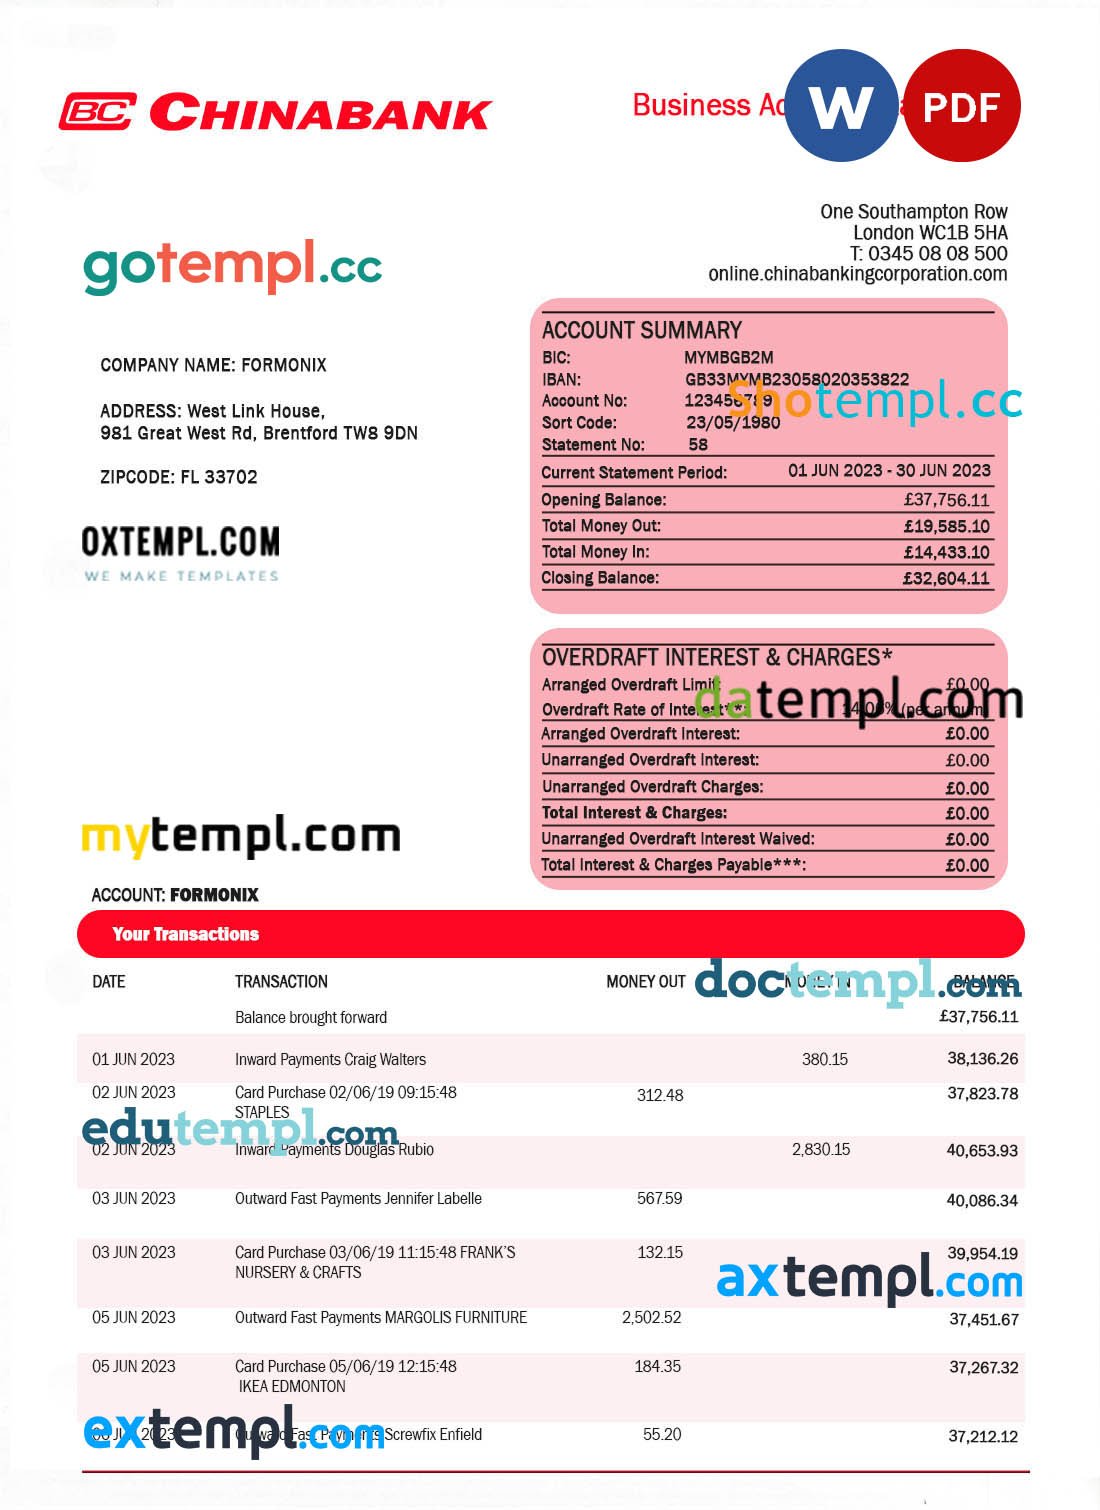 create layer universal multipurpose good-looking invoice template in Word and PDF format, fully editable